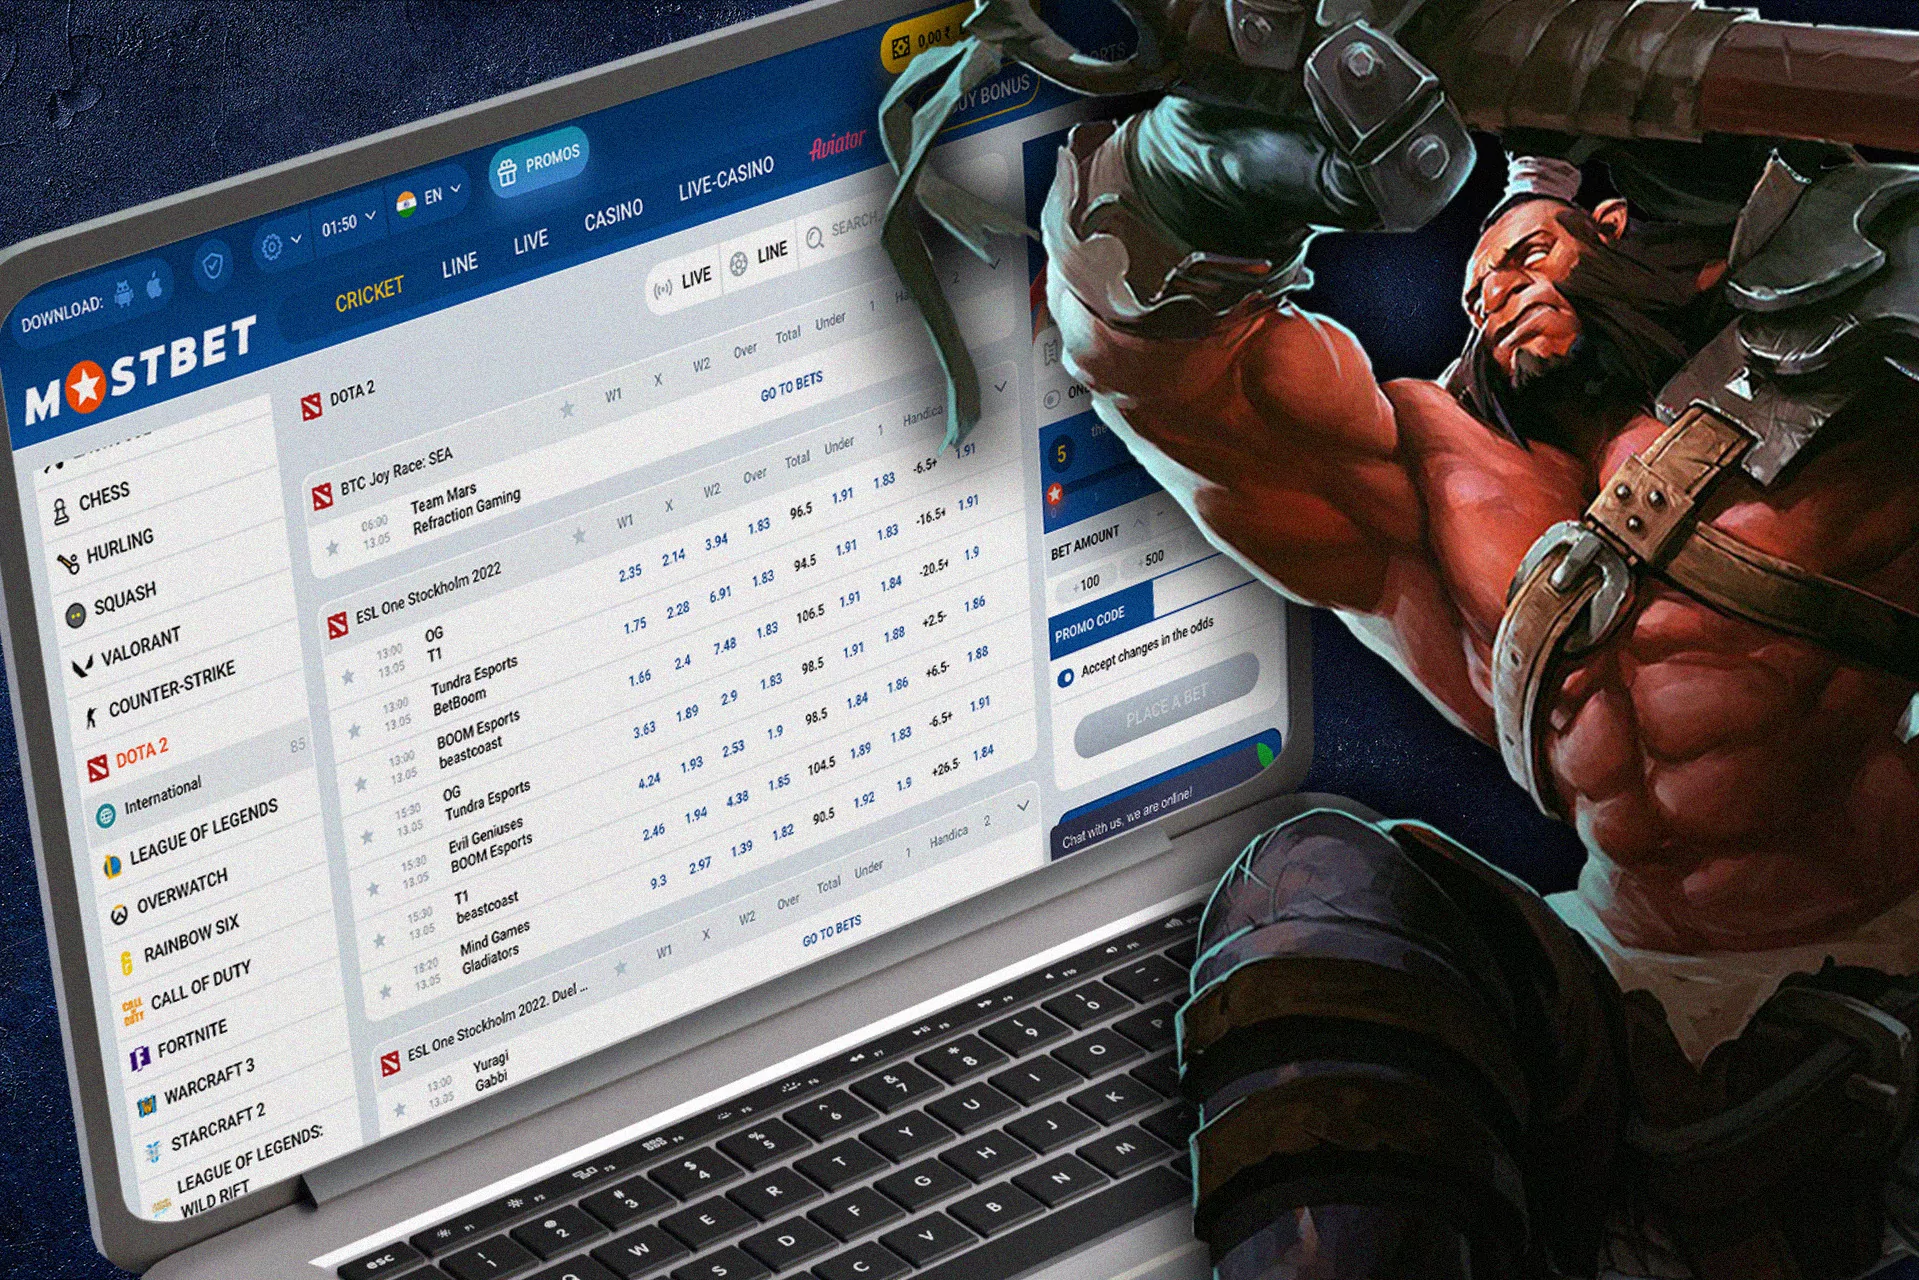 Dota-2 is one of the betting options at Mostbet.